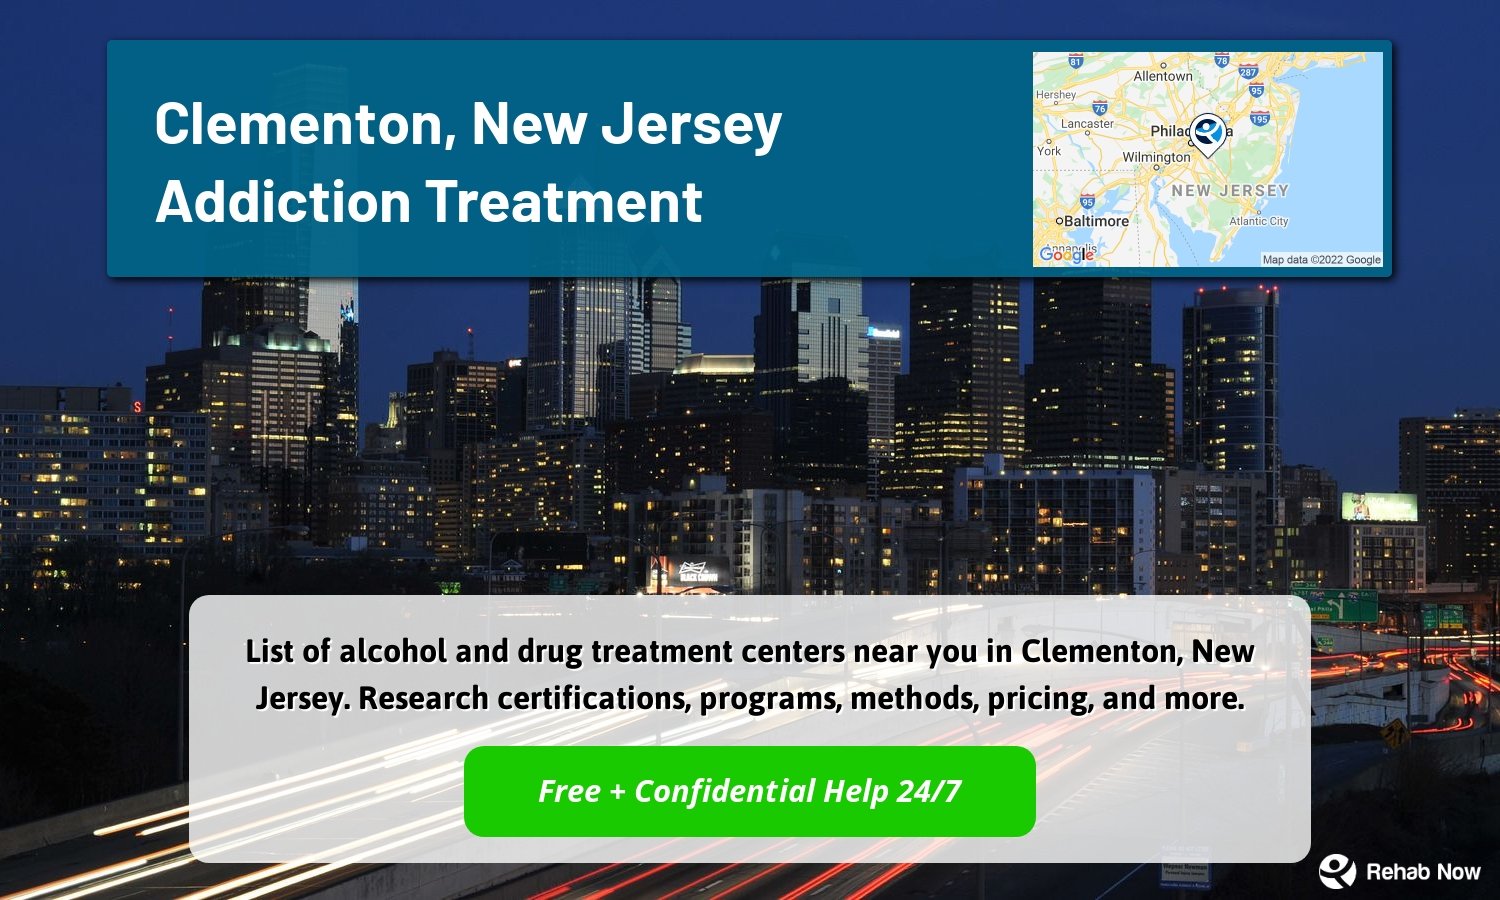 List of alcohol and drug treatment centers near you in Clementon, New Jersey. Research certifications, programs, methods, pricing, and more.